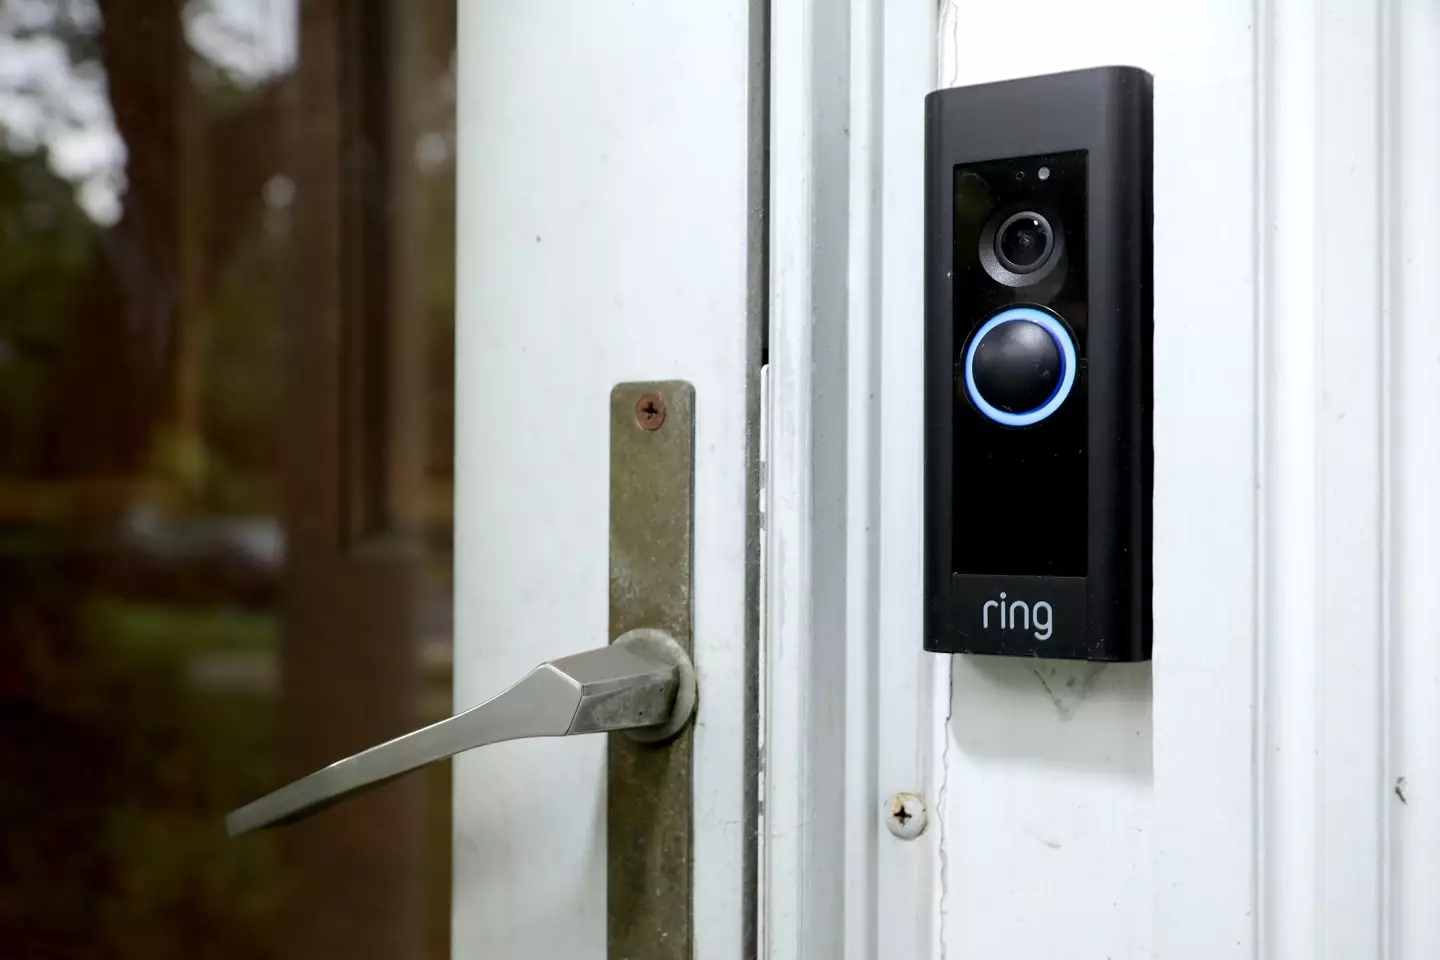 Ring doorbells allow homeowners to see a live video feed of what's happening at their front door at any given moment.